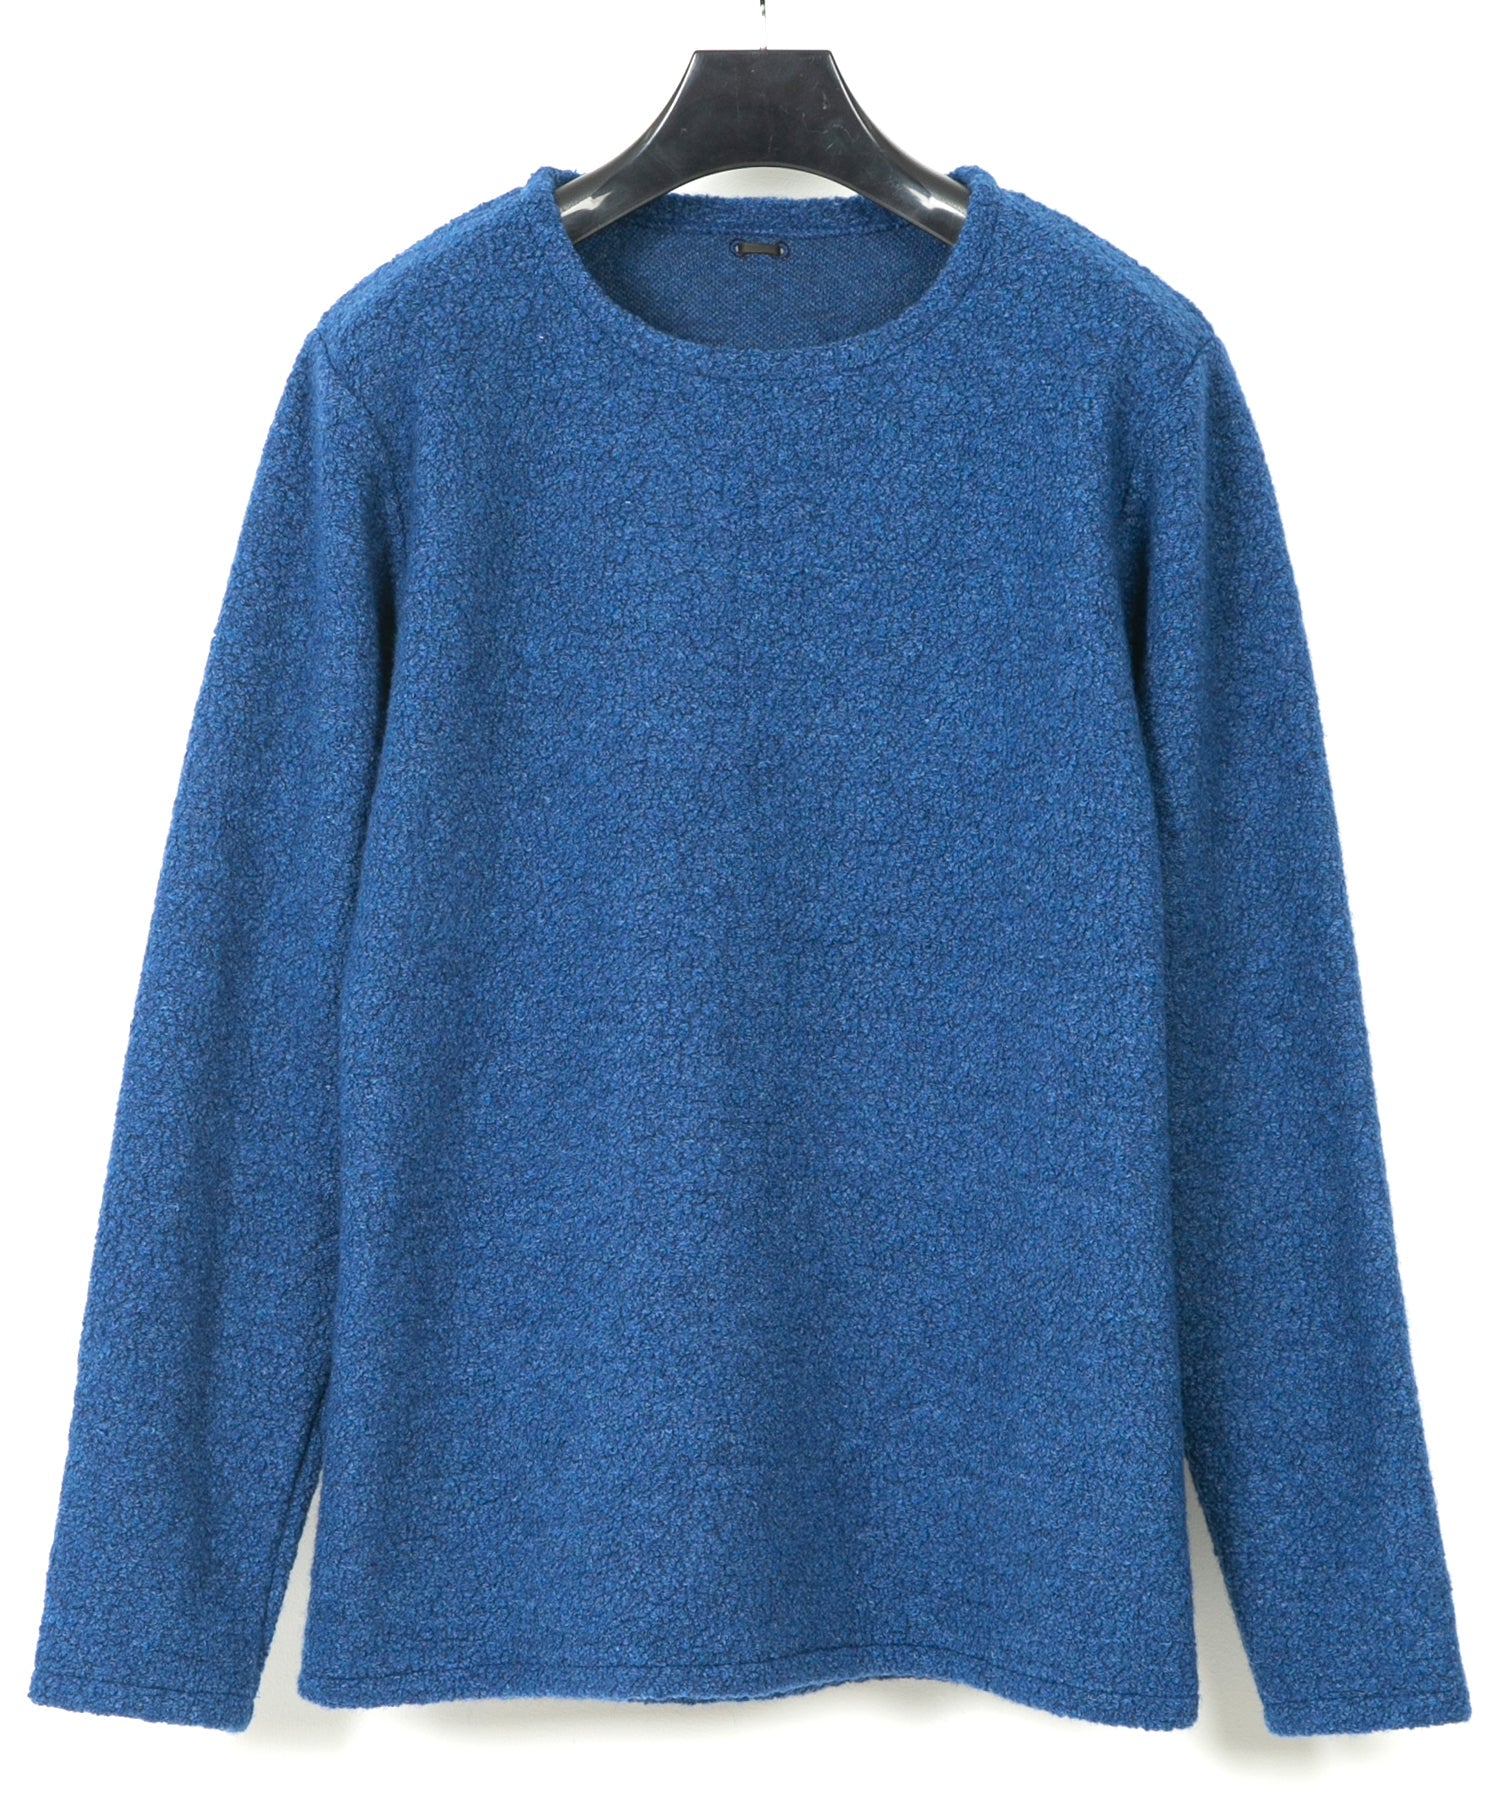 Load image into Gallery viewer, Recycled Wool Teddy Fleece Crew Neck T-shirt - BLUE